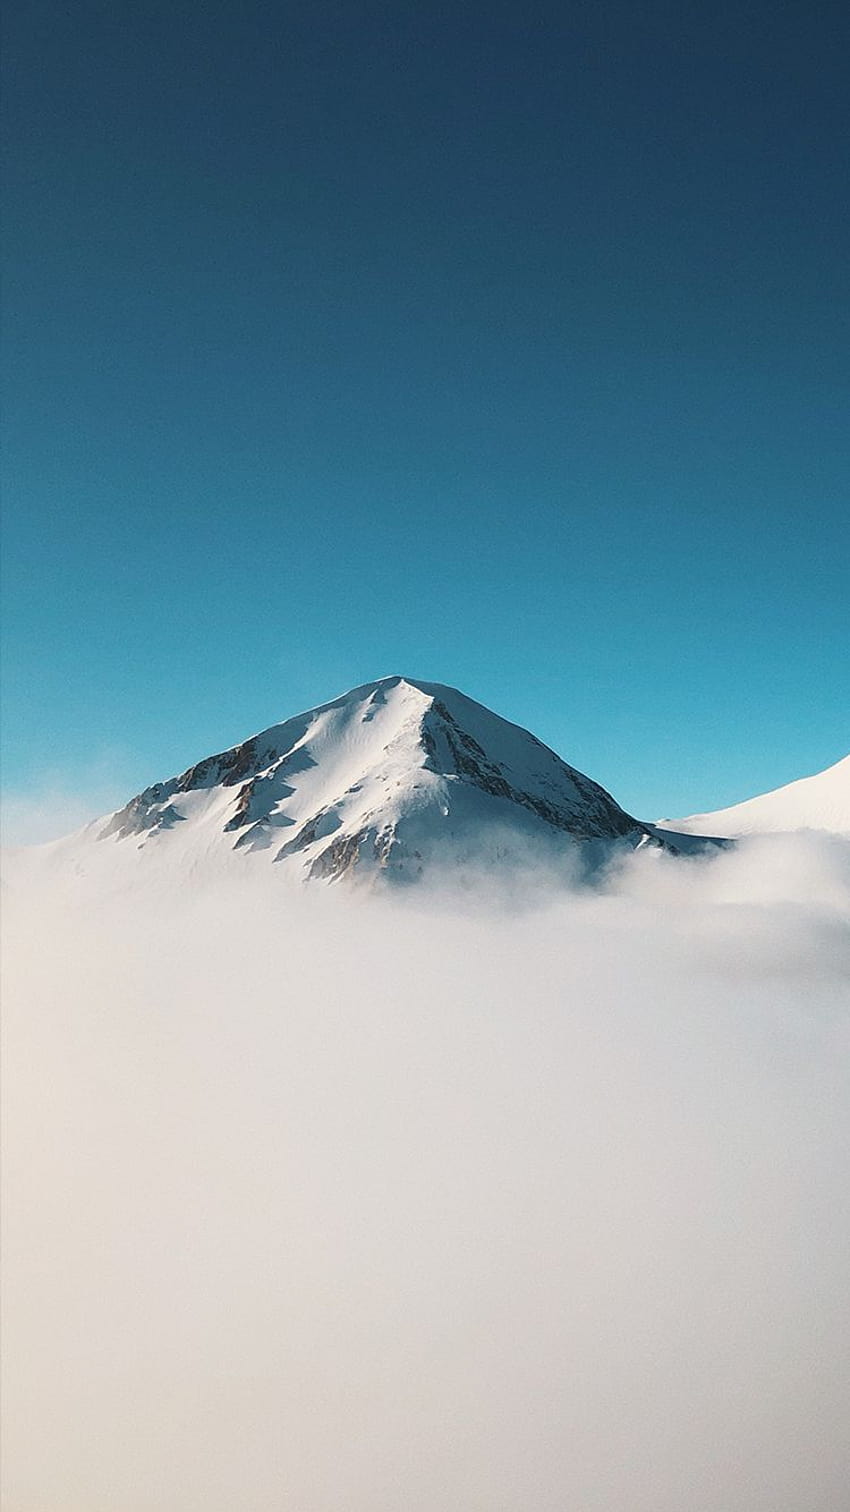 Minimalist Mountain Above Clouds Iphone, aesthetic minimalist mountain HD phone wallpaper